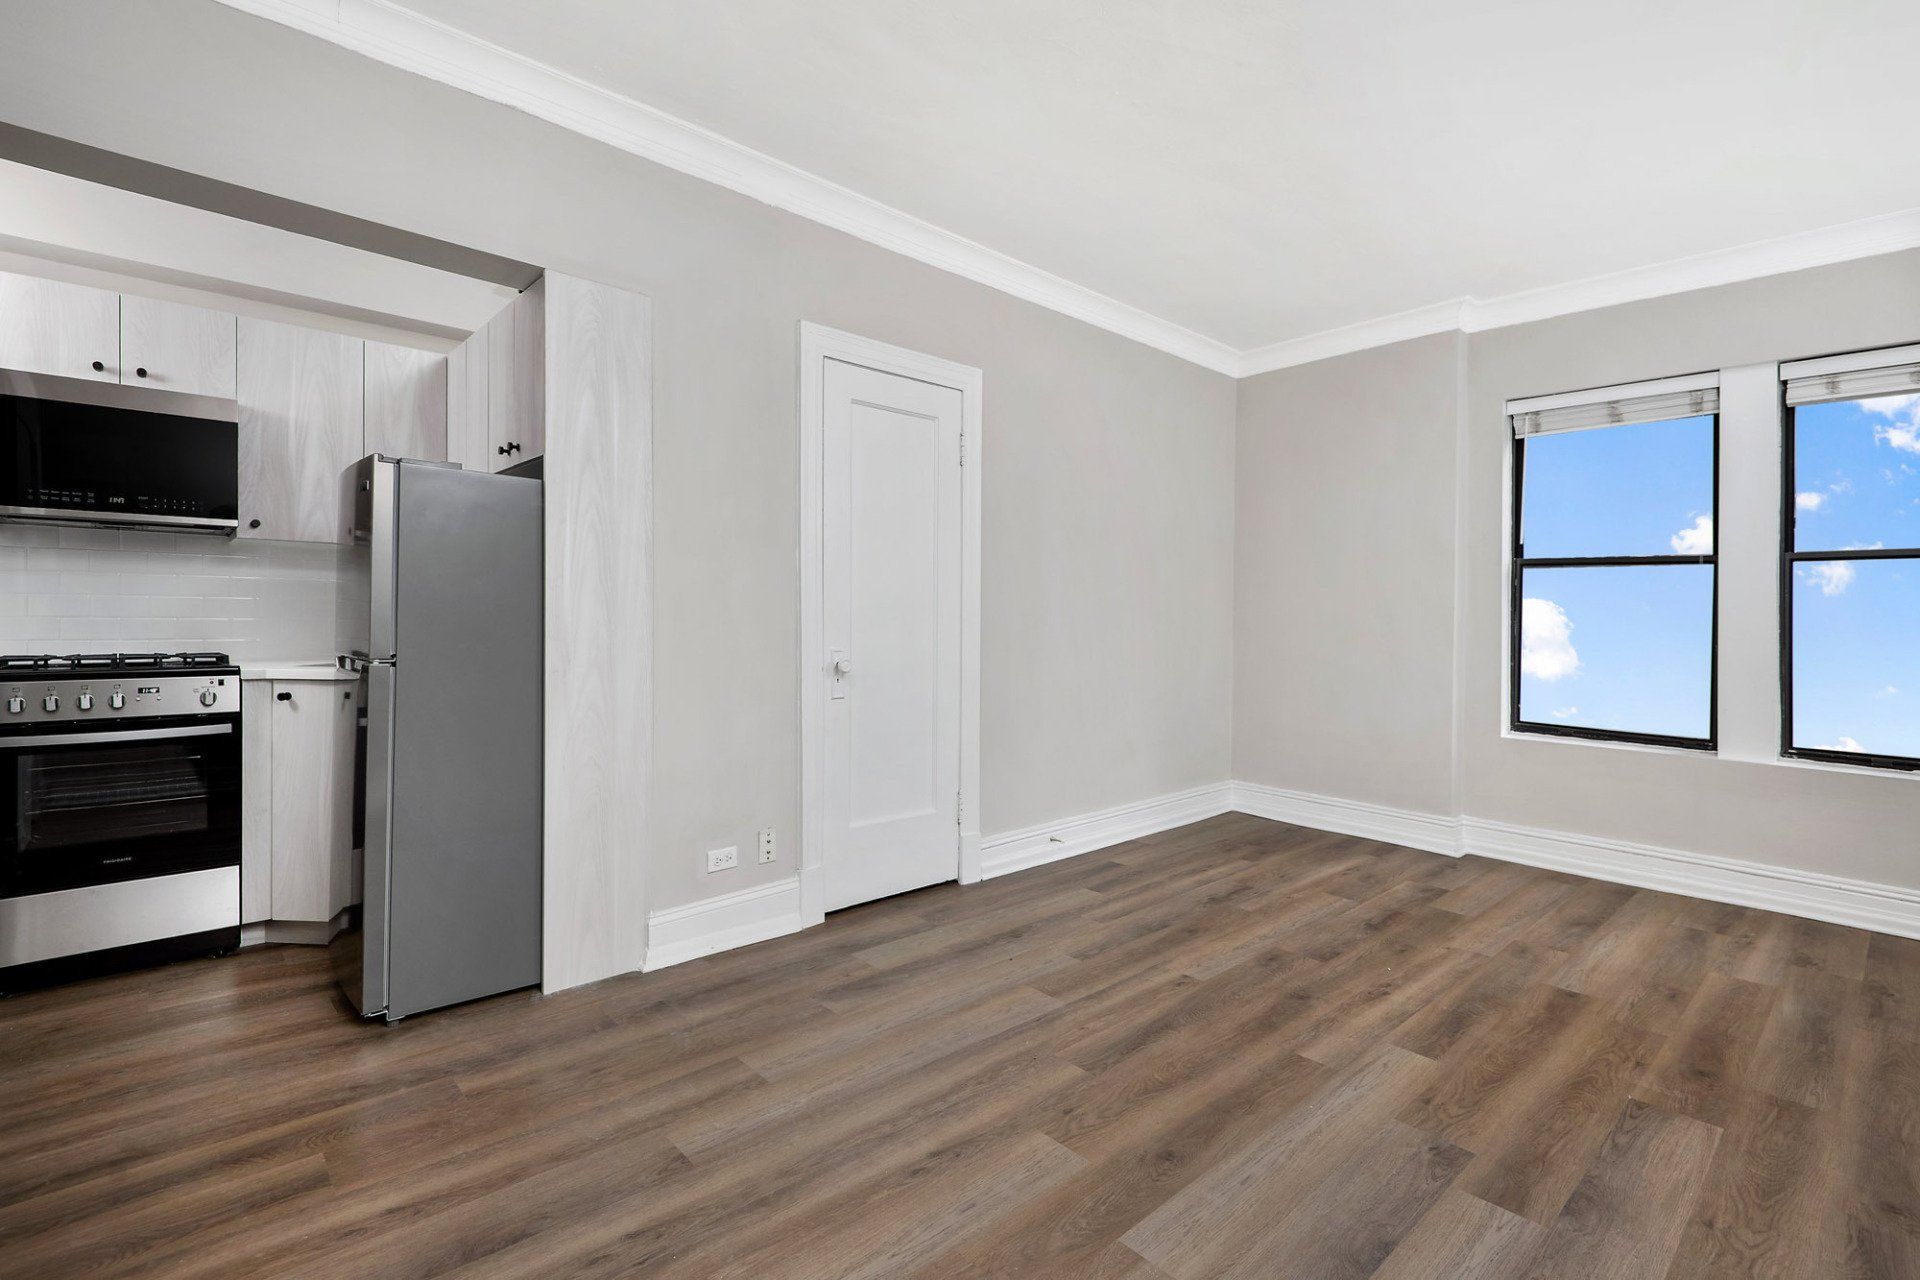 An empty living room with hardwood floors and a kitchen in the background at Reside on Clarendon.